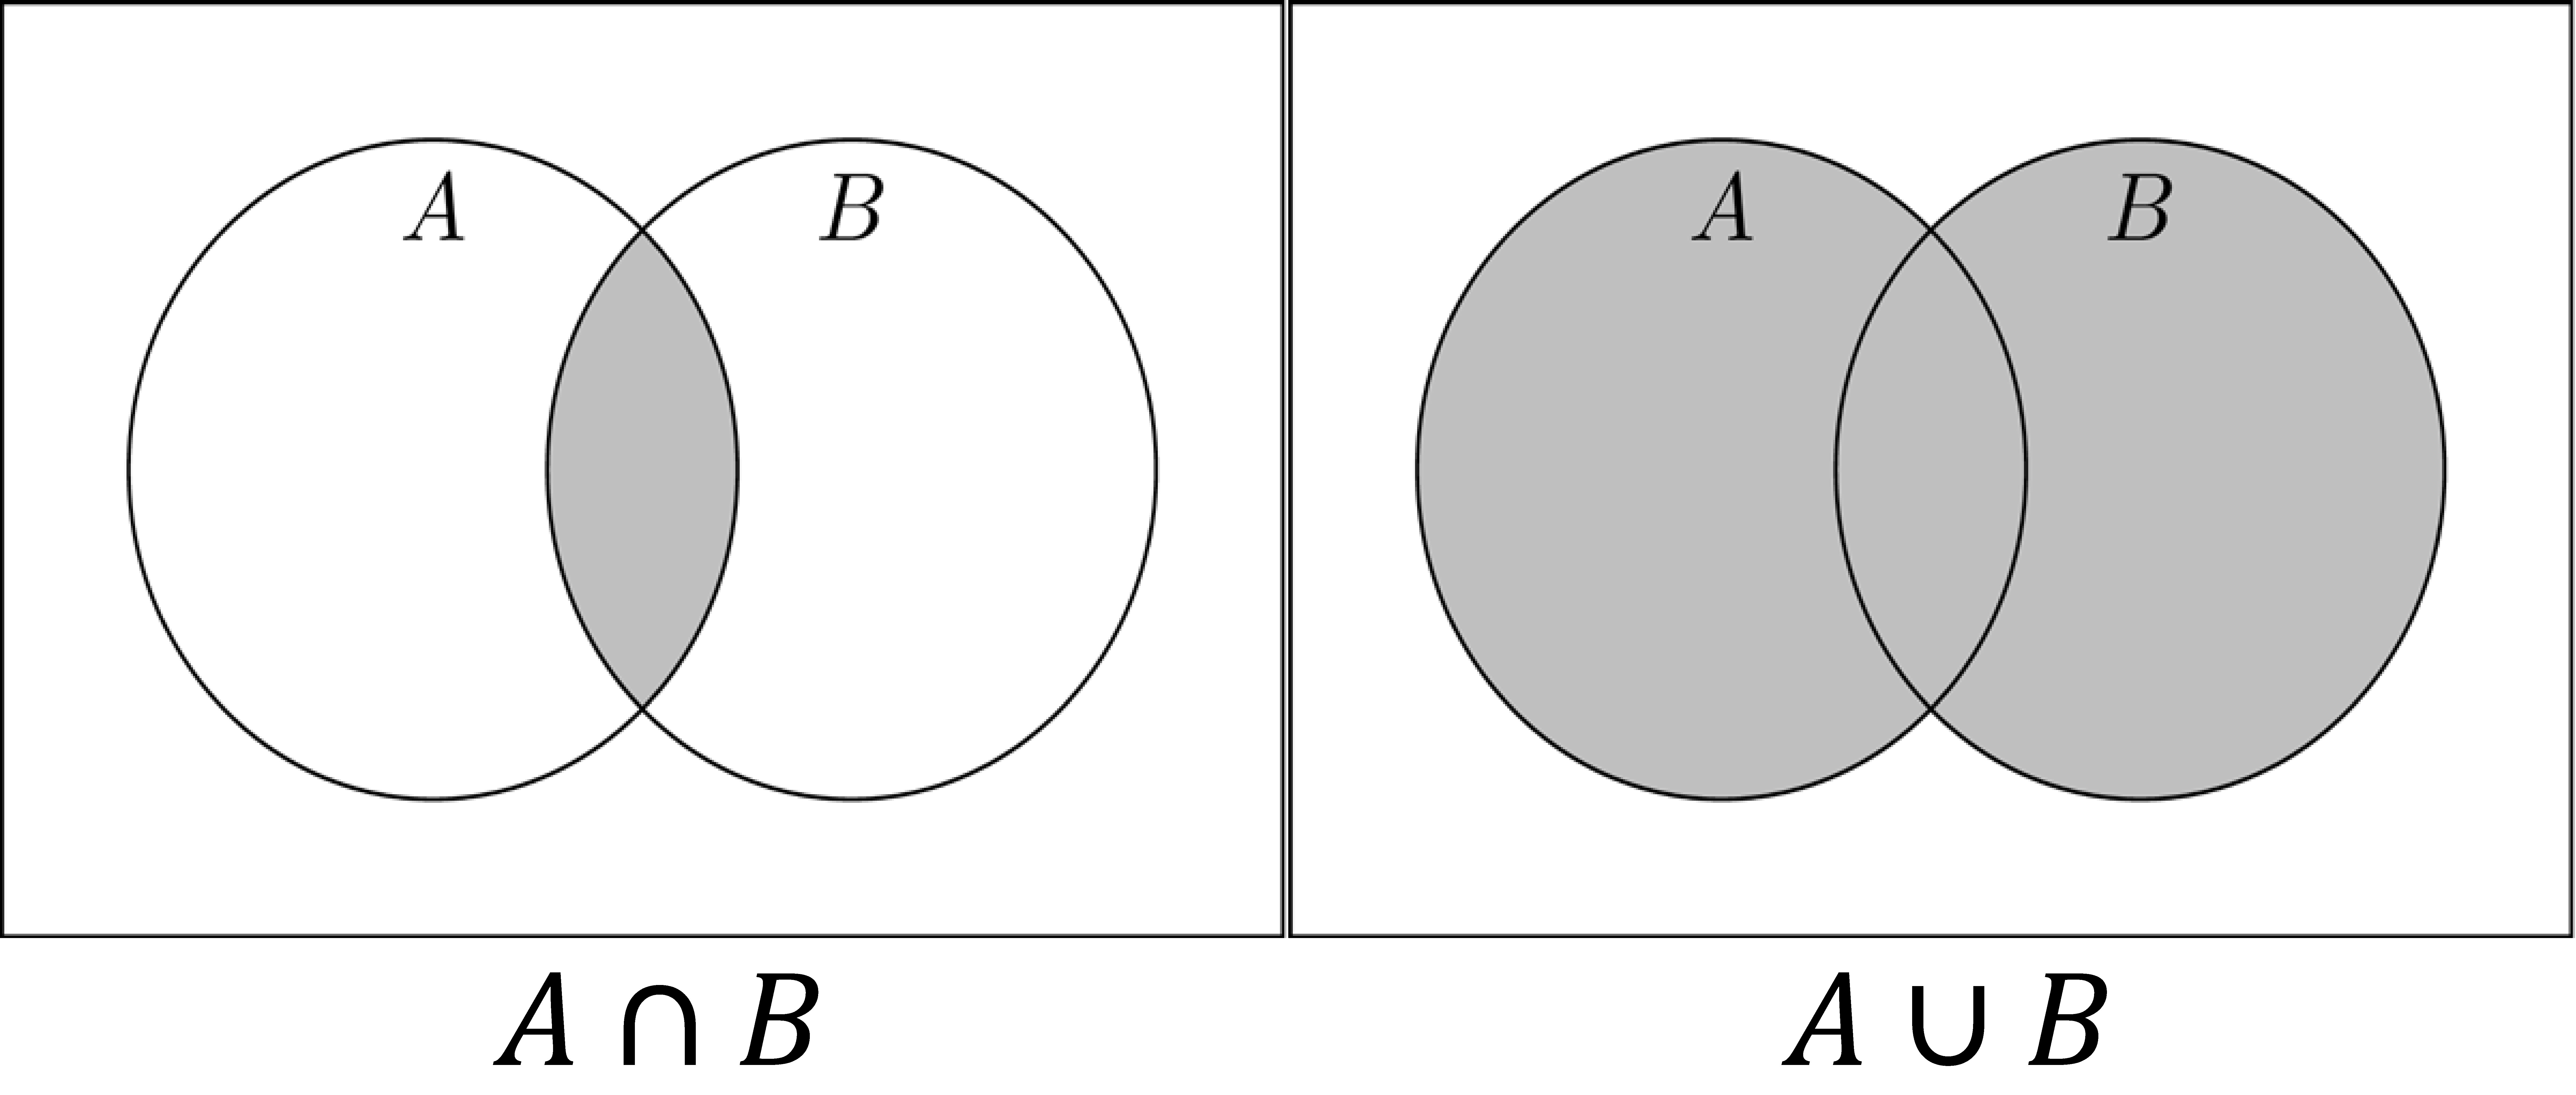 The union and intersection of two sets